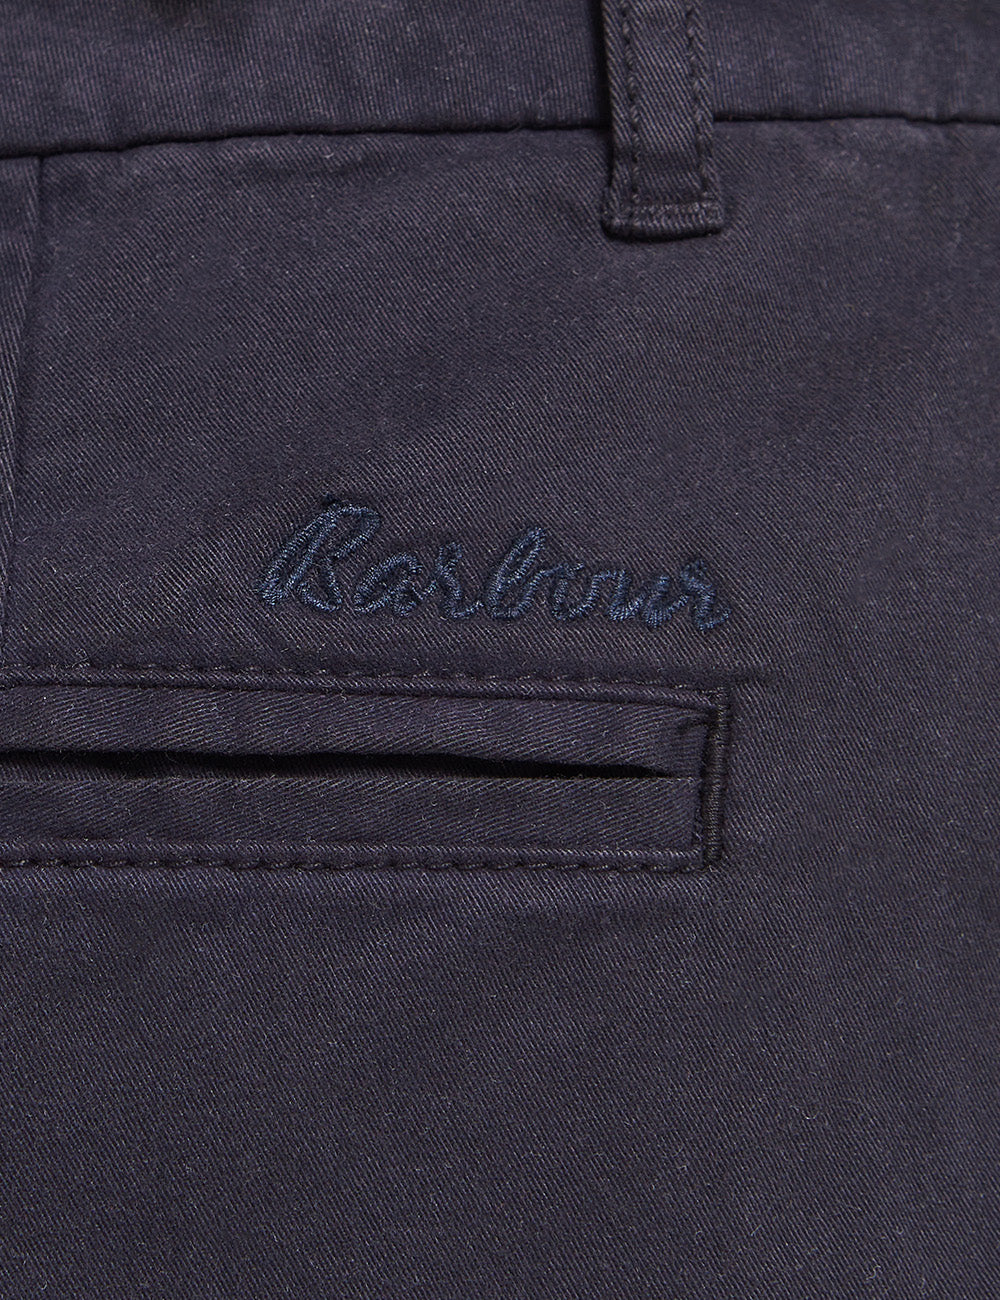 Barbour Chino Shorts - Navy